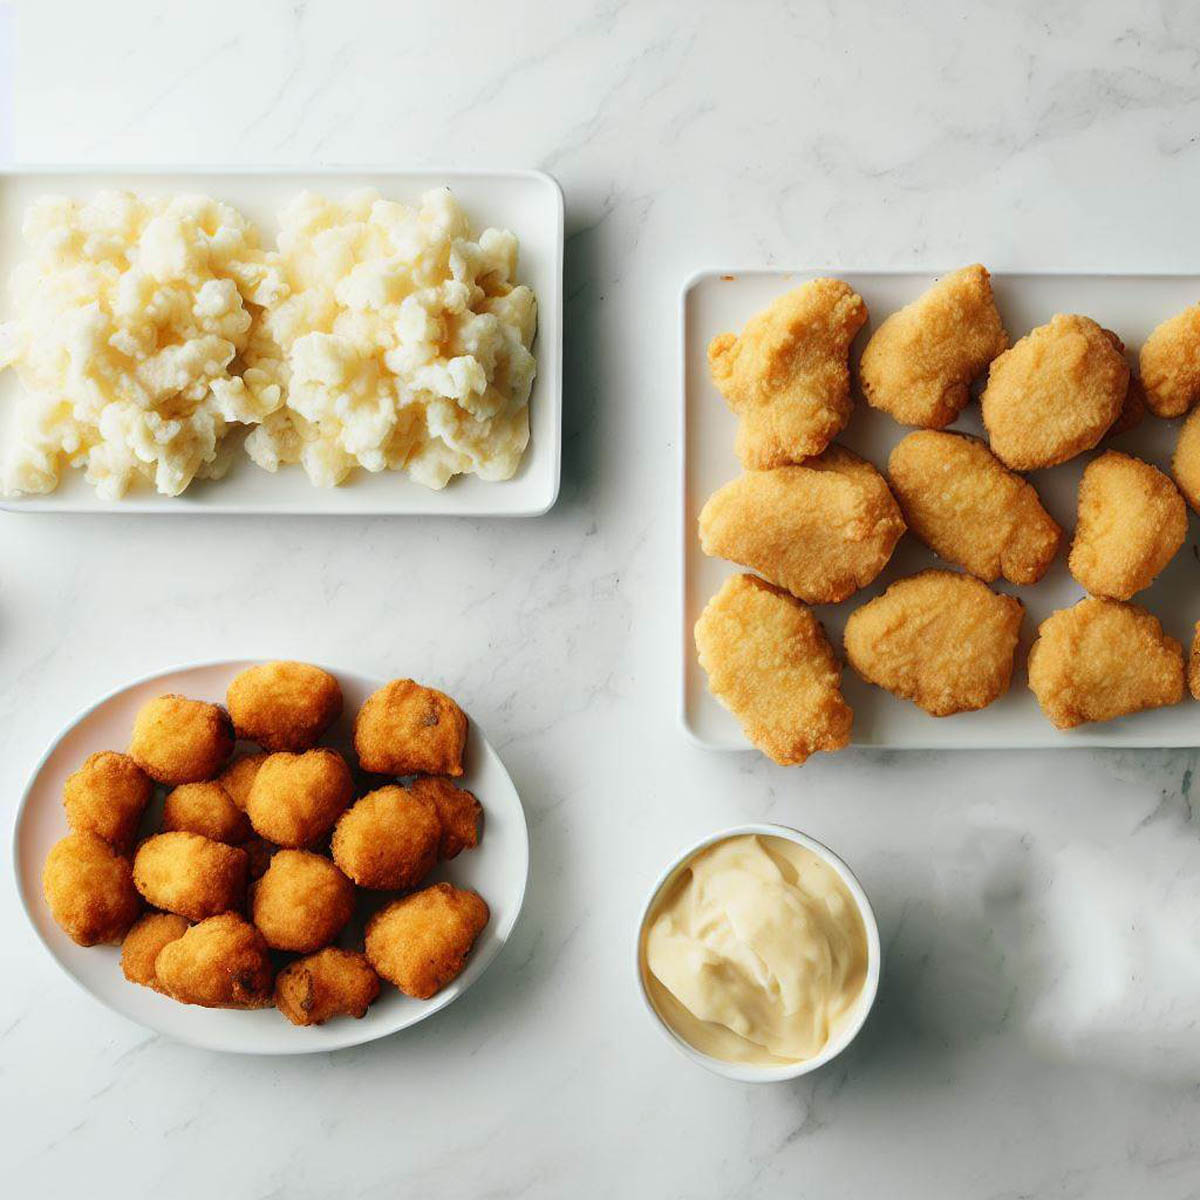 Ingredients for KFC Famous Bowl Casserole - nuggets and potatoes in separate bowls.